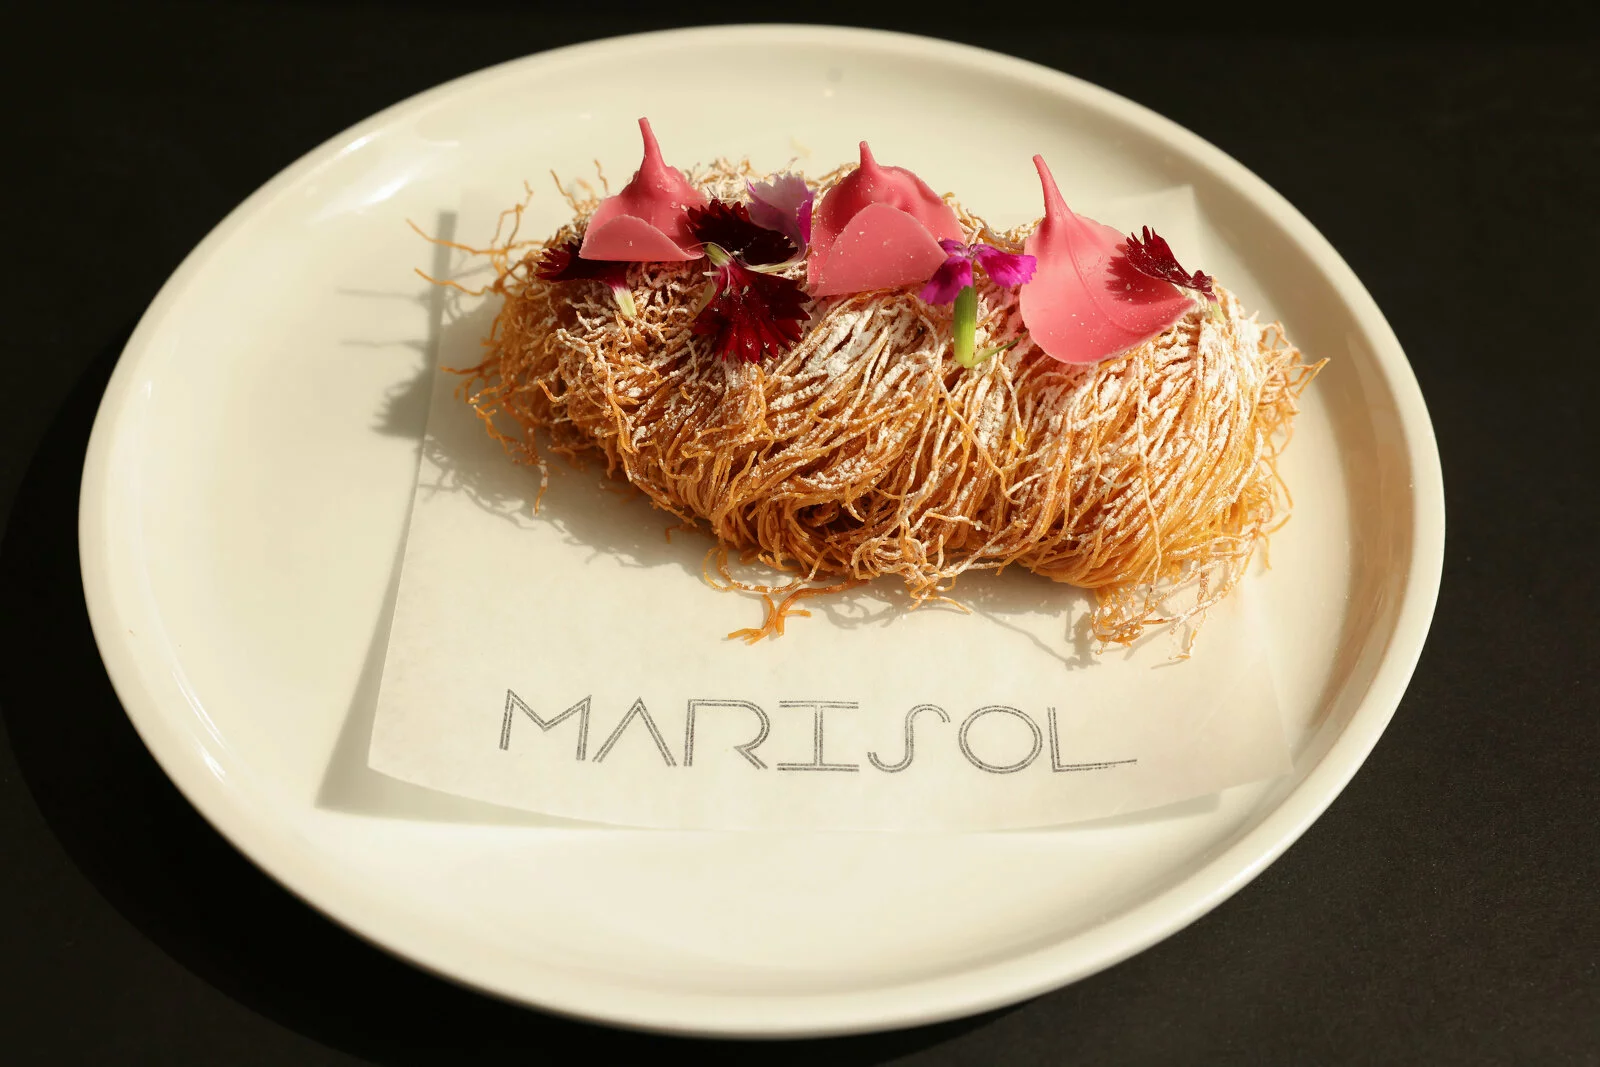 Long strings of shredded dough with flowers on top rests on a parchment paper labeled Marisol on top of a white plate.